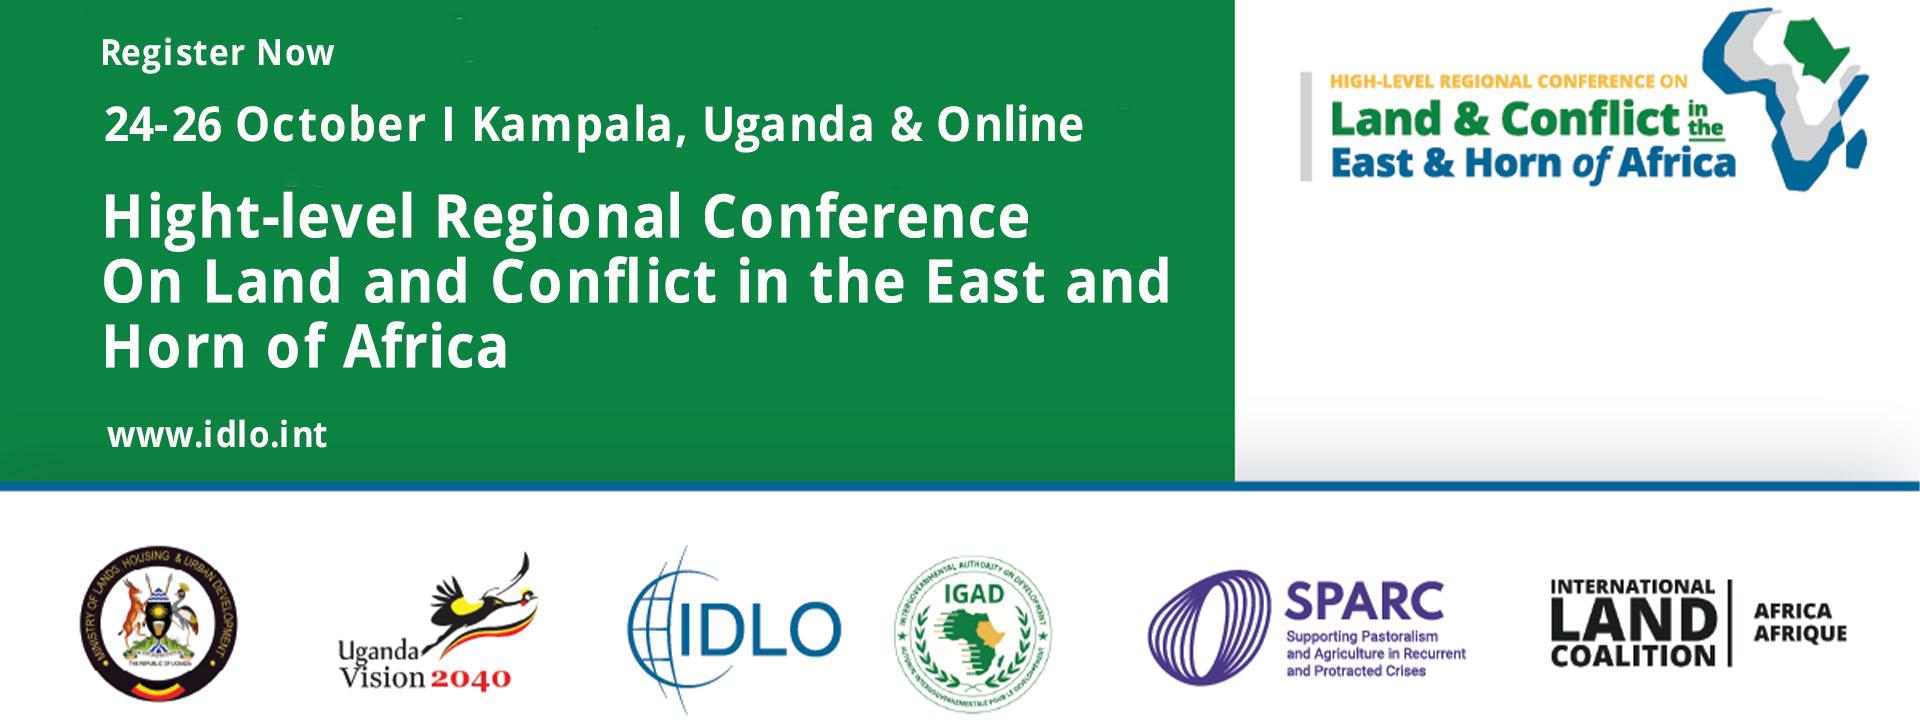 High-Level Regional Conference on Land and Conflict in the East and Horn of Africa